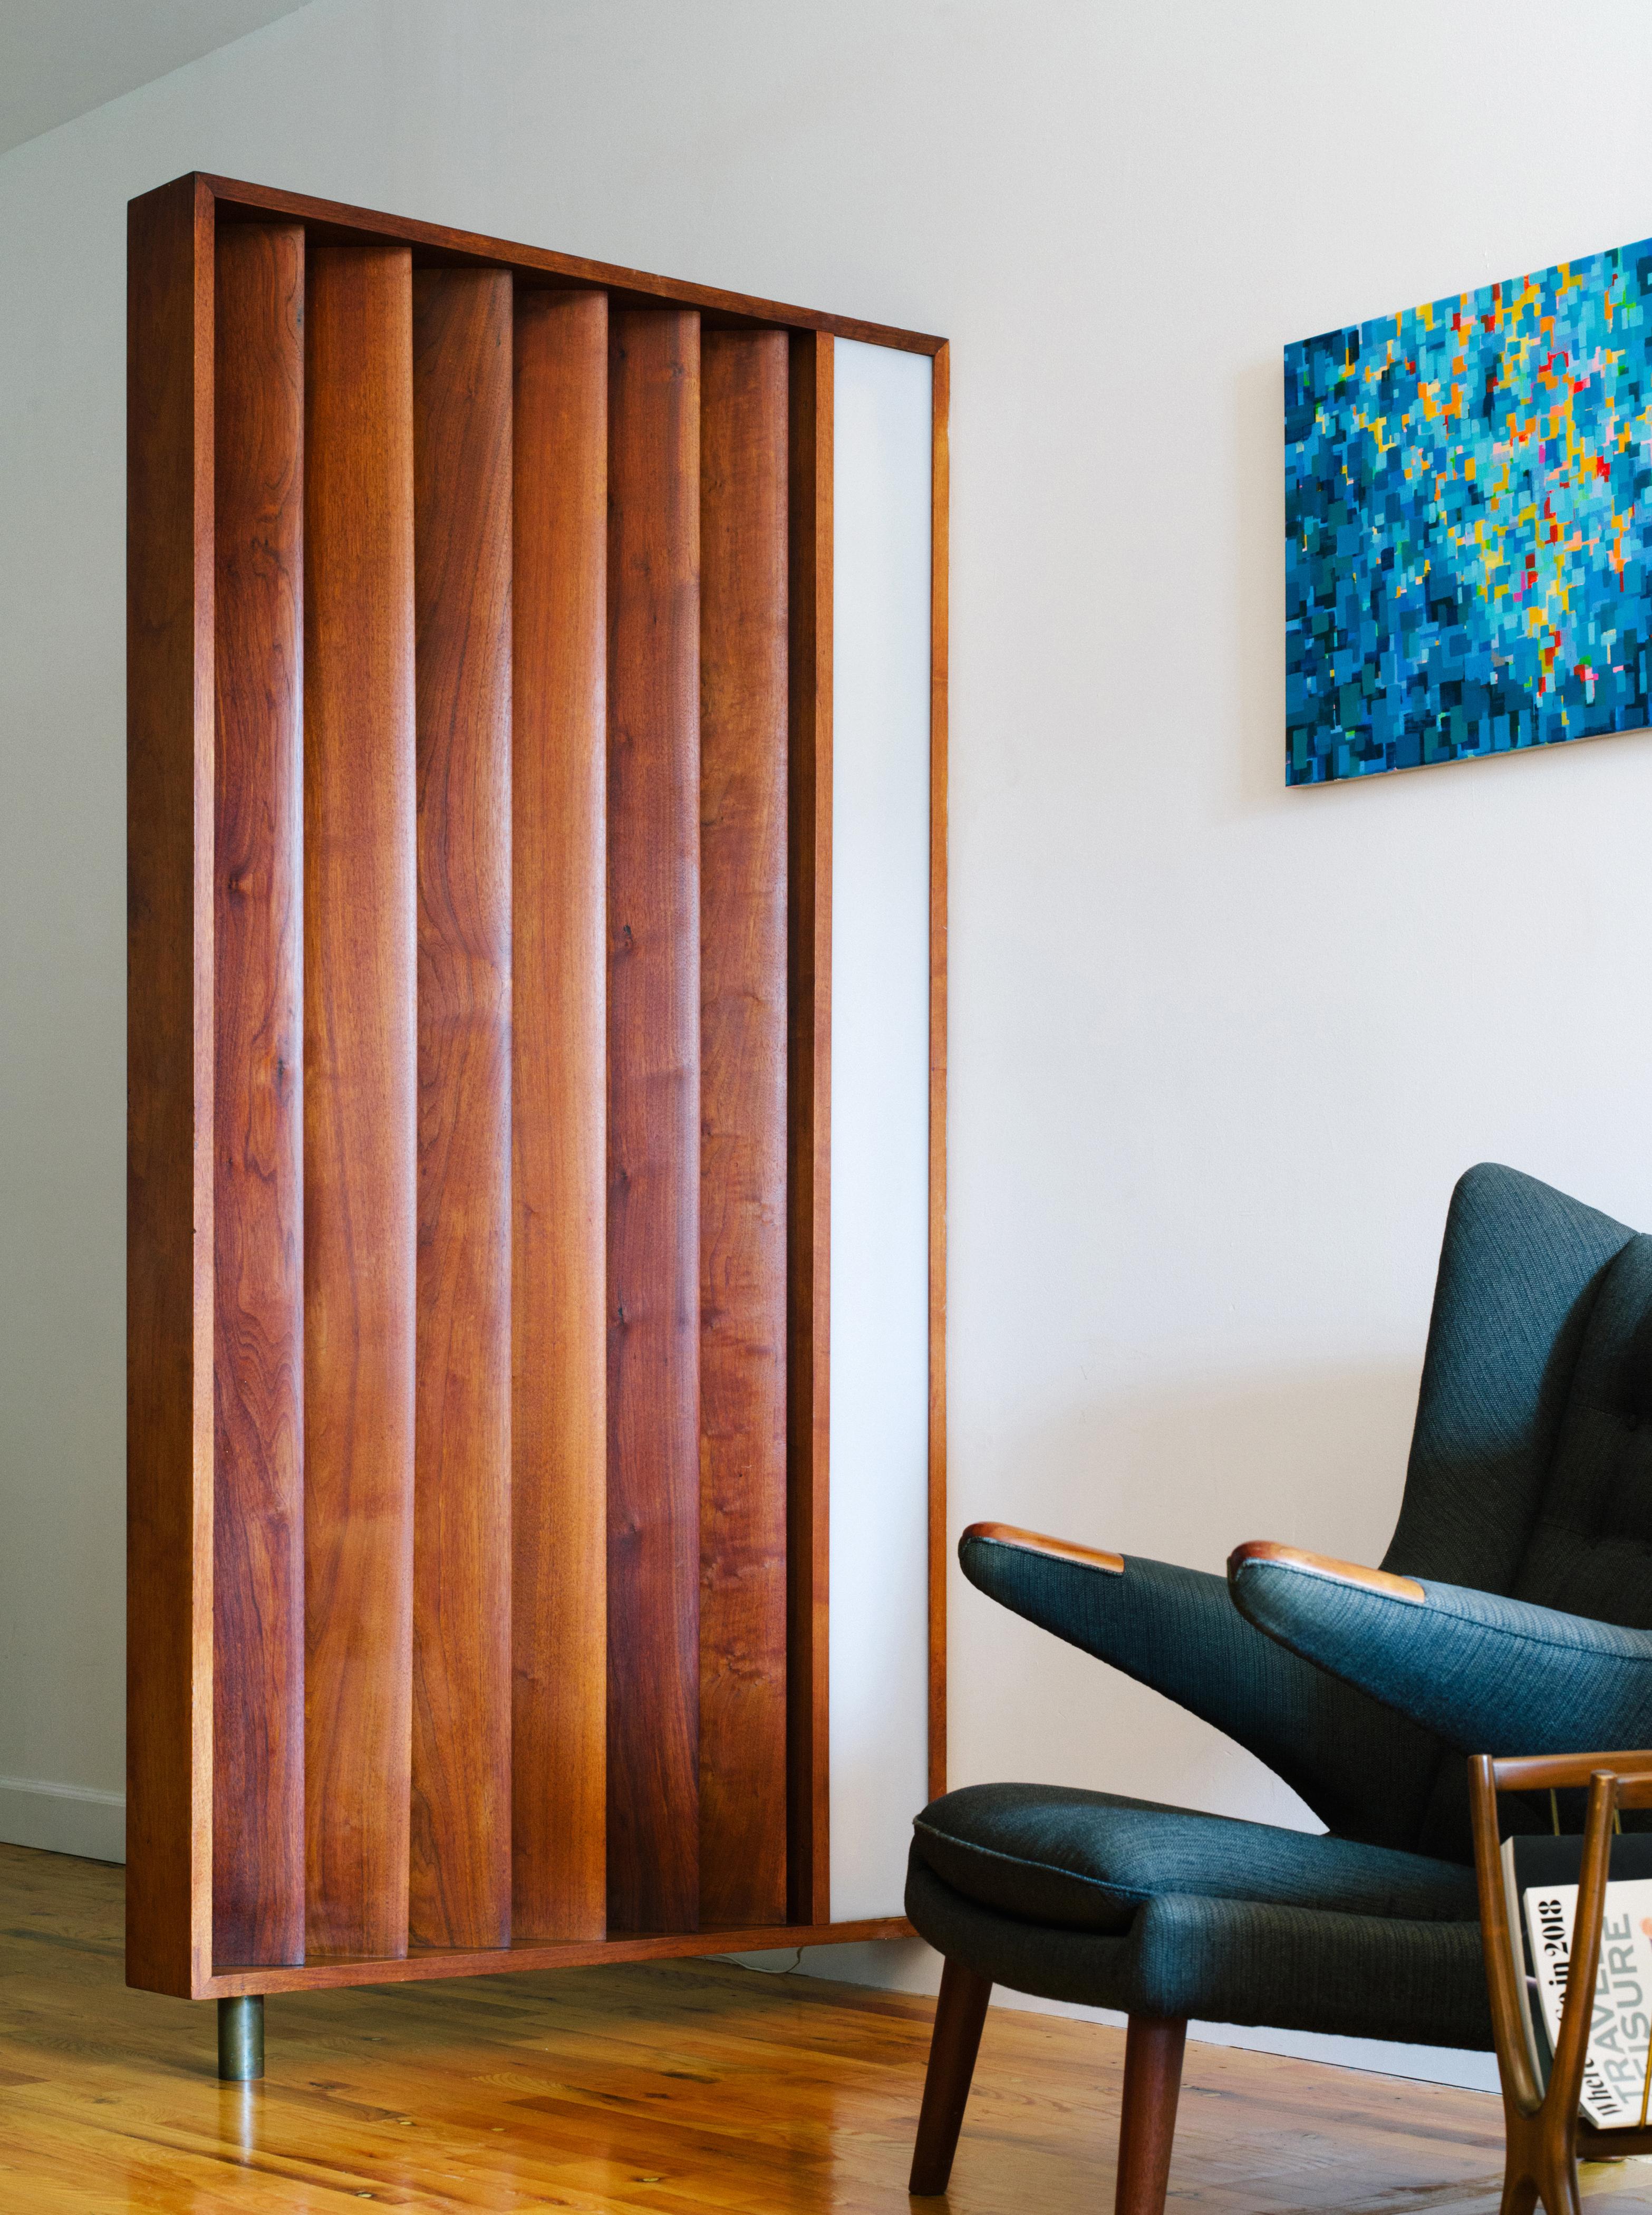 An incredibly rare louvered and illuminated room divider in solid walnut floating over a cylindrical brass foot, custom-designed by Vladimir Kagan circa 1967. Six sculptural, marquise-shaped slats are angled at 45 degrees to the frame and flank the